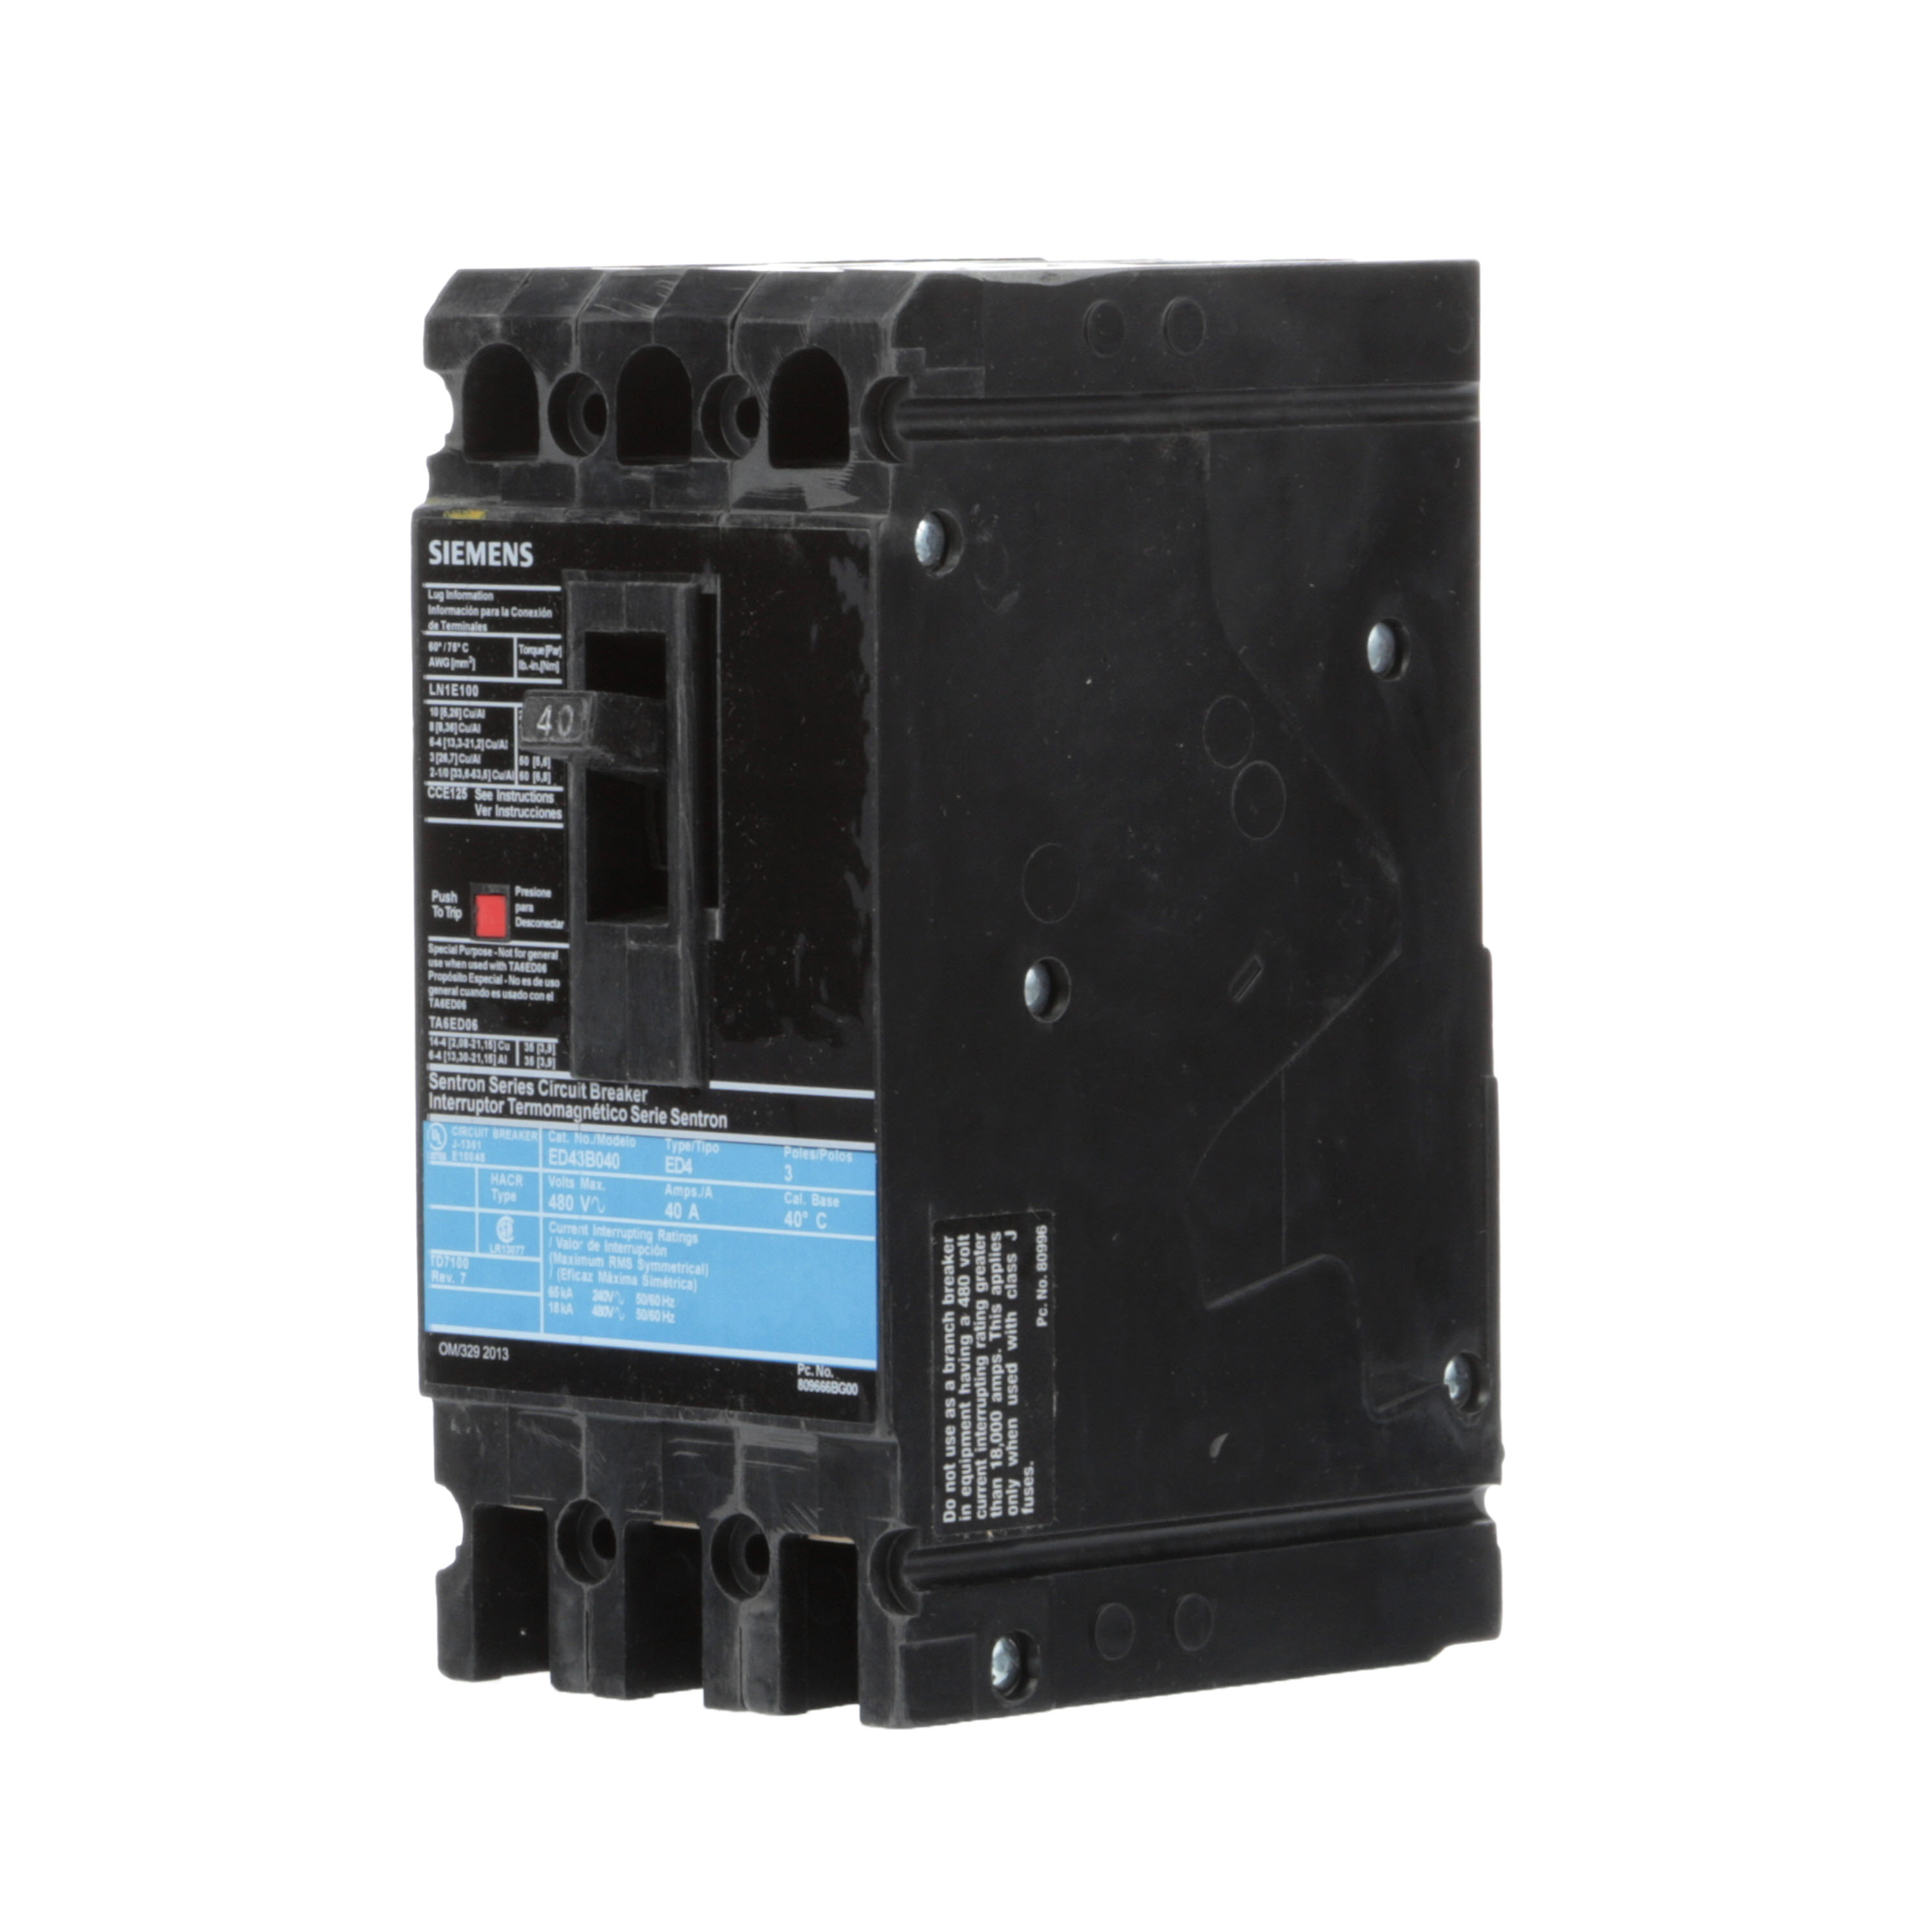 SIEMENS LOW VOLTAGE SENTRON MOLDED CASE CIRCUIT BREAKER WITH THERMAL - MAGNETICTRIP UNIT. STANDARD 40 DEG C BREAKER ED FRAME WITH STANDARD BREAKING CAPACITY. 40A 3-POLE (18KAIC AT 480V). NON-INTERCHANGEABLE TRIP UNIT. SPECIAL FEATURES LINE AND LOAD SIDE LUGS (LN1E100) WIRE RANGE 10 - 1/0AWG (CU/AL). DIMENSIONS (W x Hx D) IN 3.00 x 6.4 x 3.92.